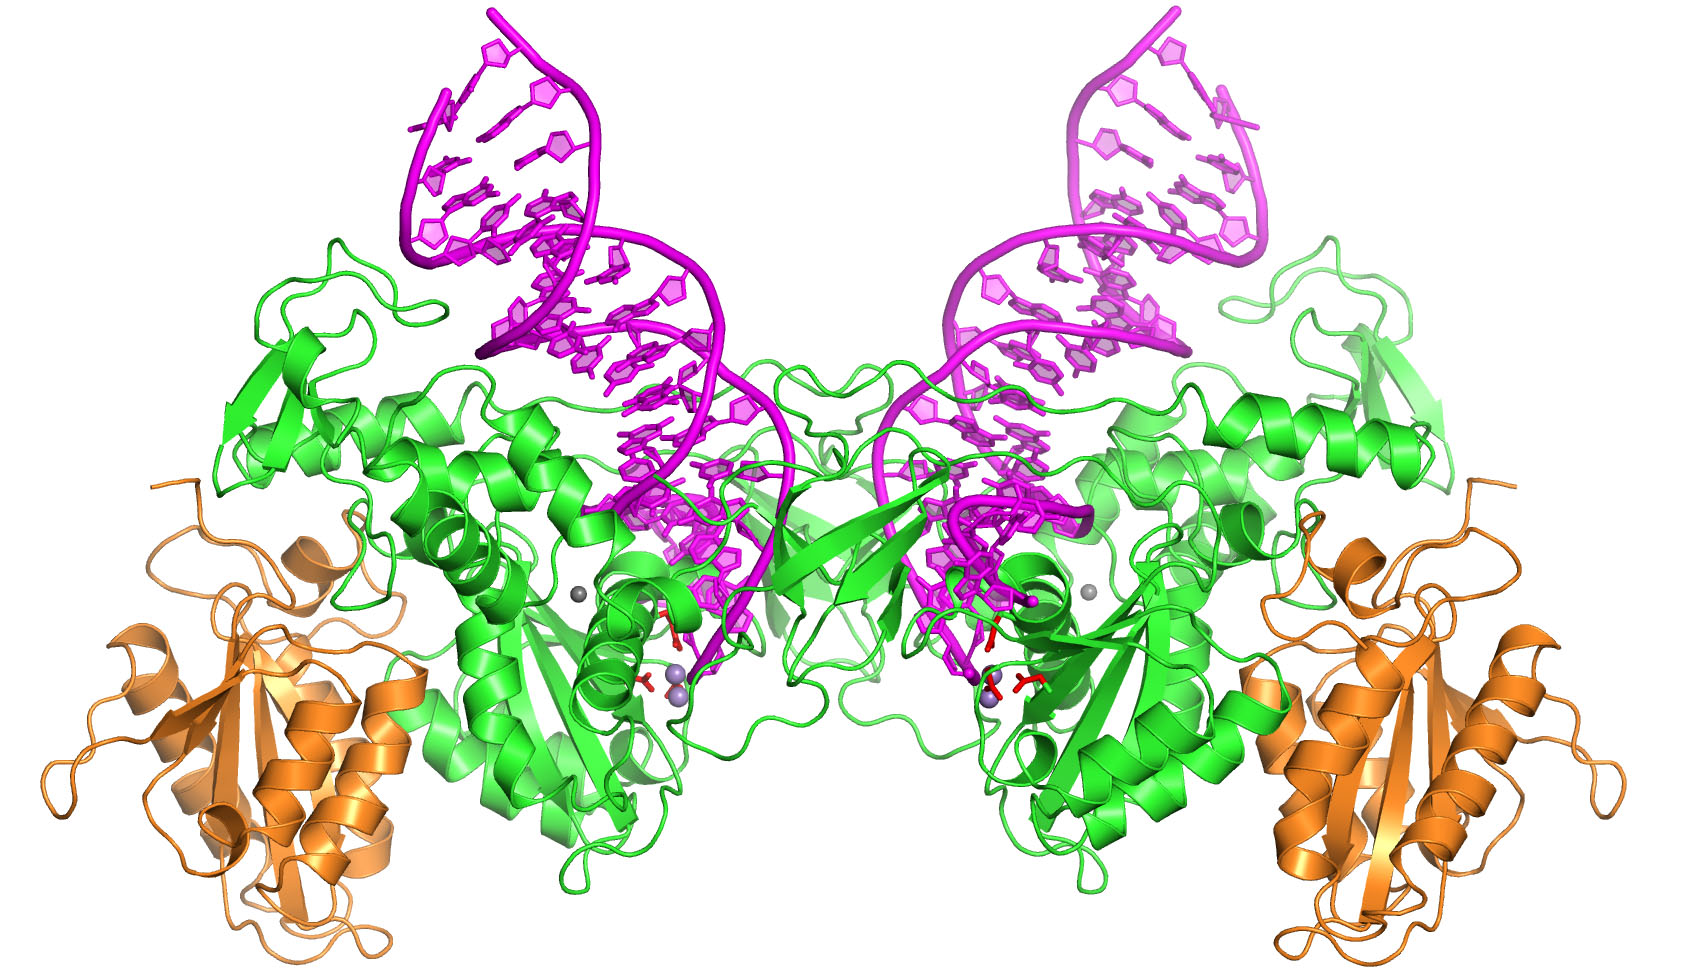 A tetramer of PFV integrase assembled on viral DNA ends (PDB ID 3L2S). Research published in Nature by Imperial College London. The protein molecules are shown as cartoons in green and orange and viral DNA in magenta. Red sticks represent side chains of the invariant active site carboxylates; grey spheres are the essential metal atoms.    